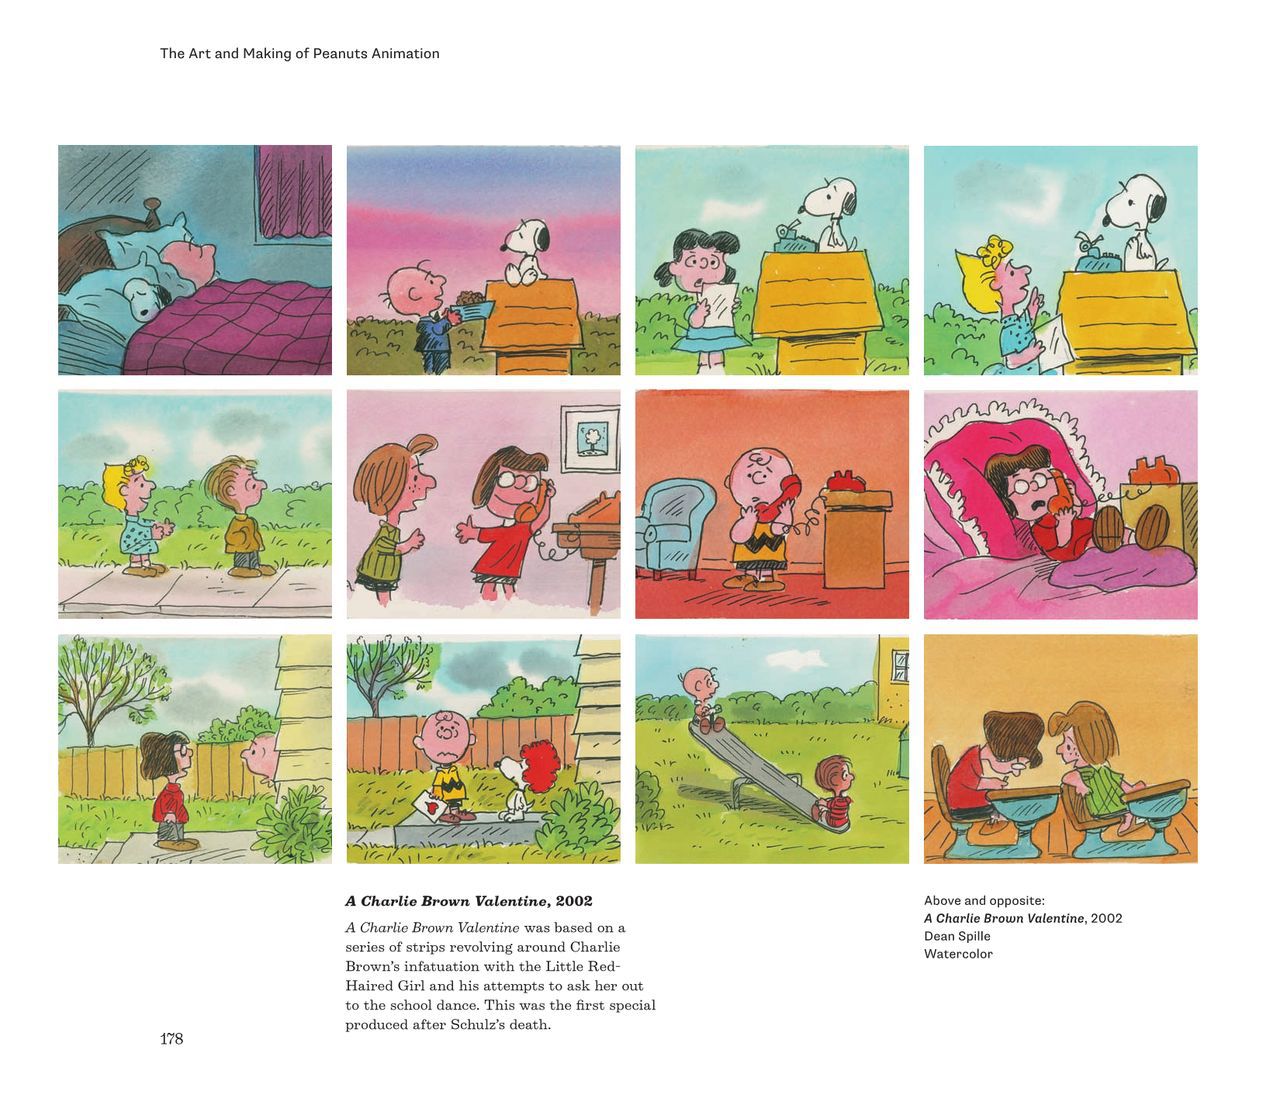 The Art and Making of Peanuts Animation 182